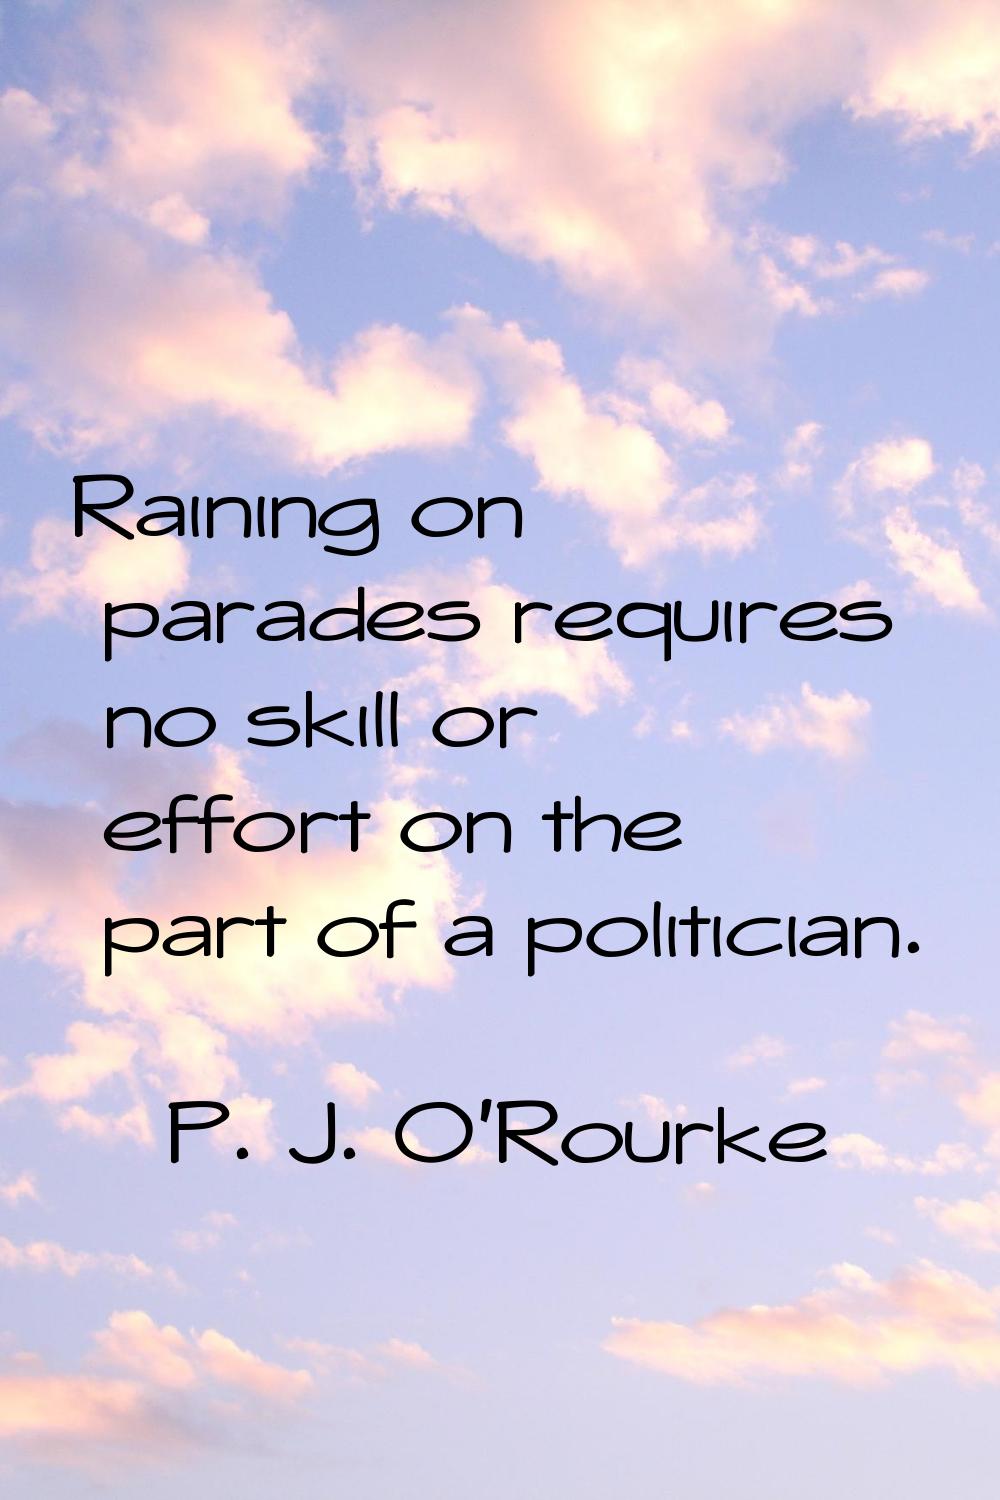 Raining on parades requires no skill or effort on the part of a politician.